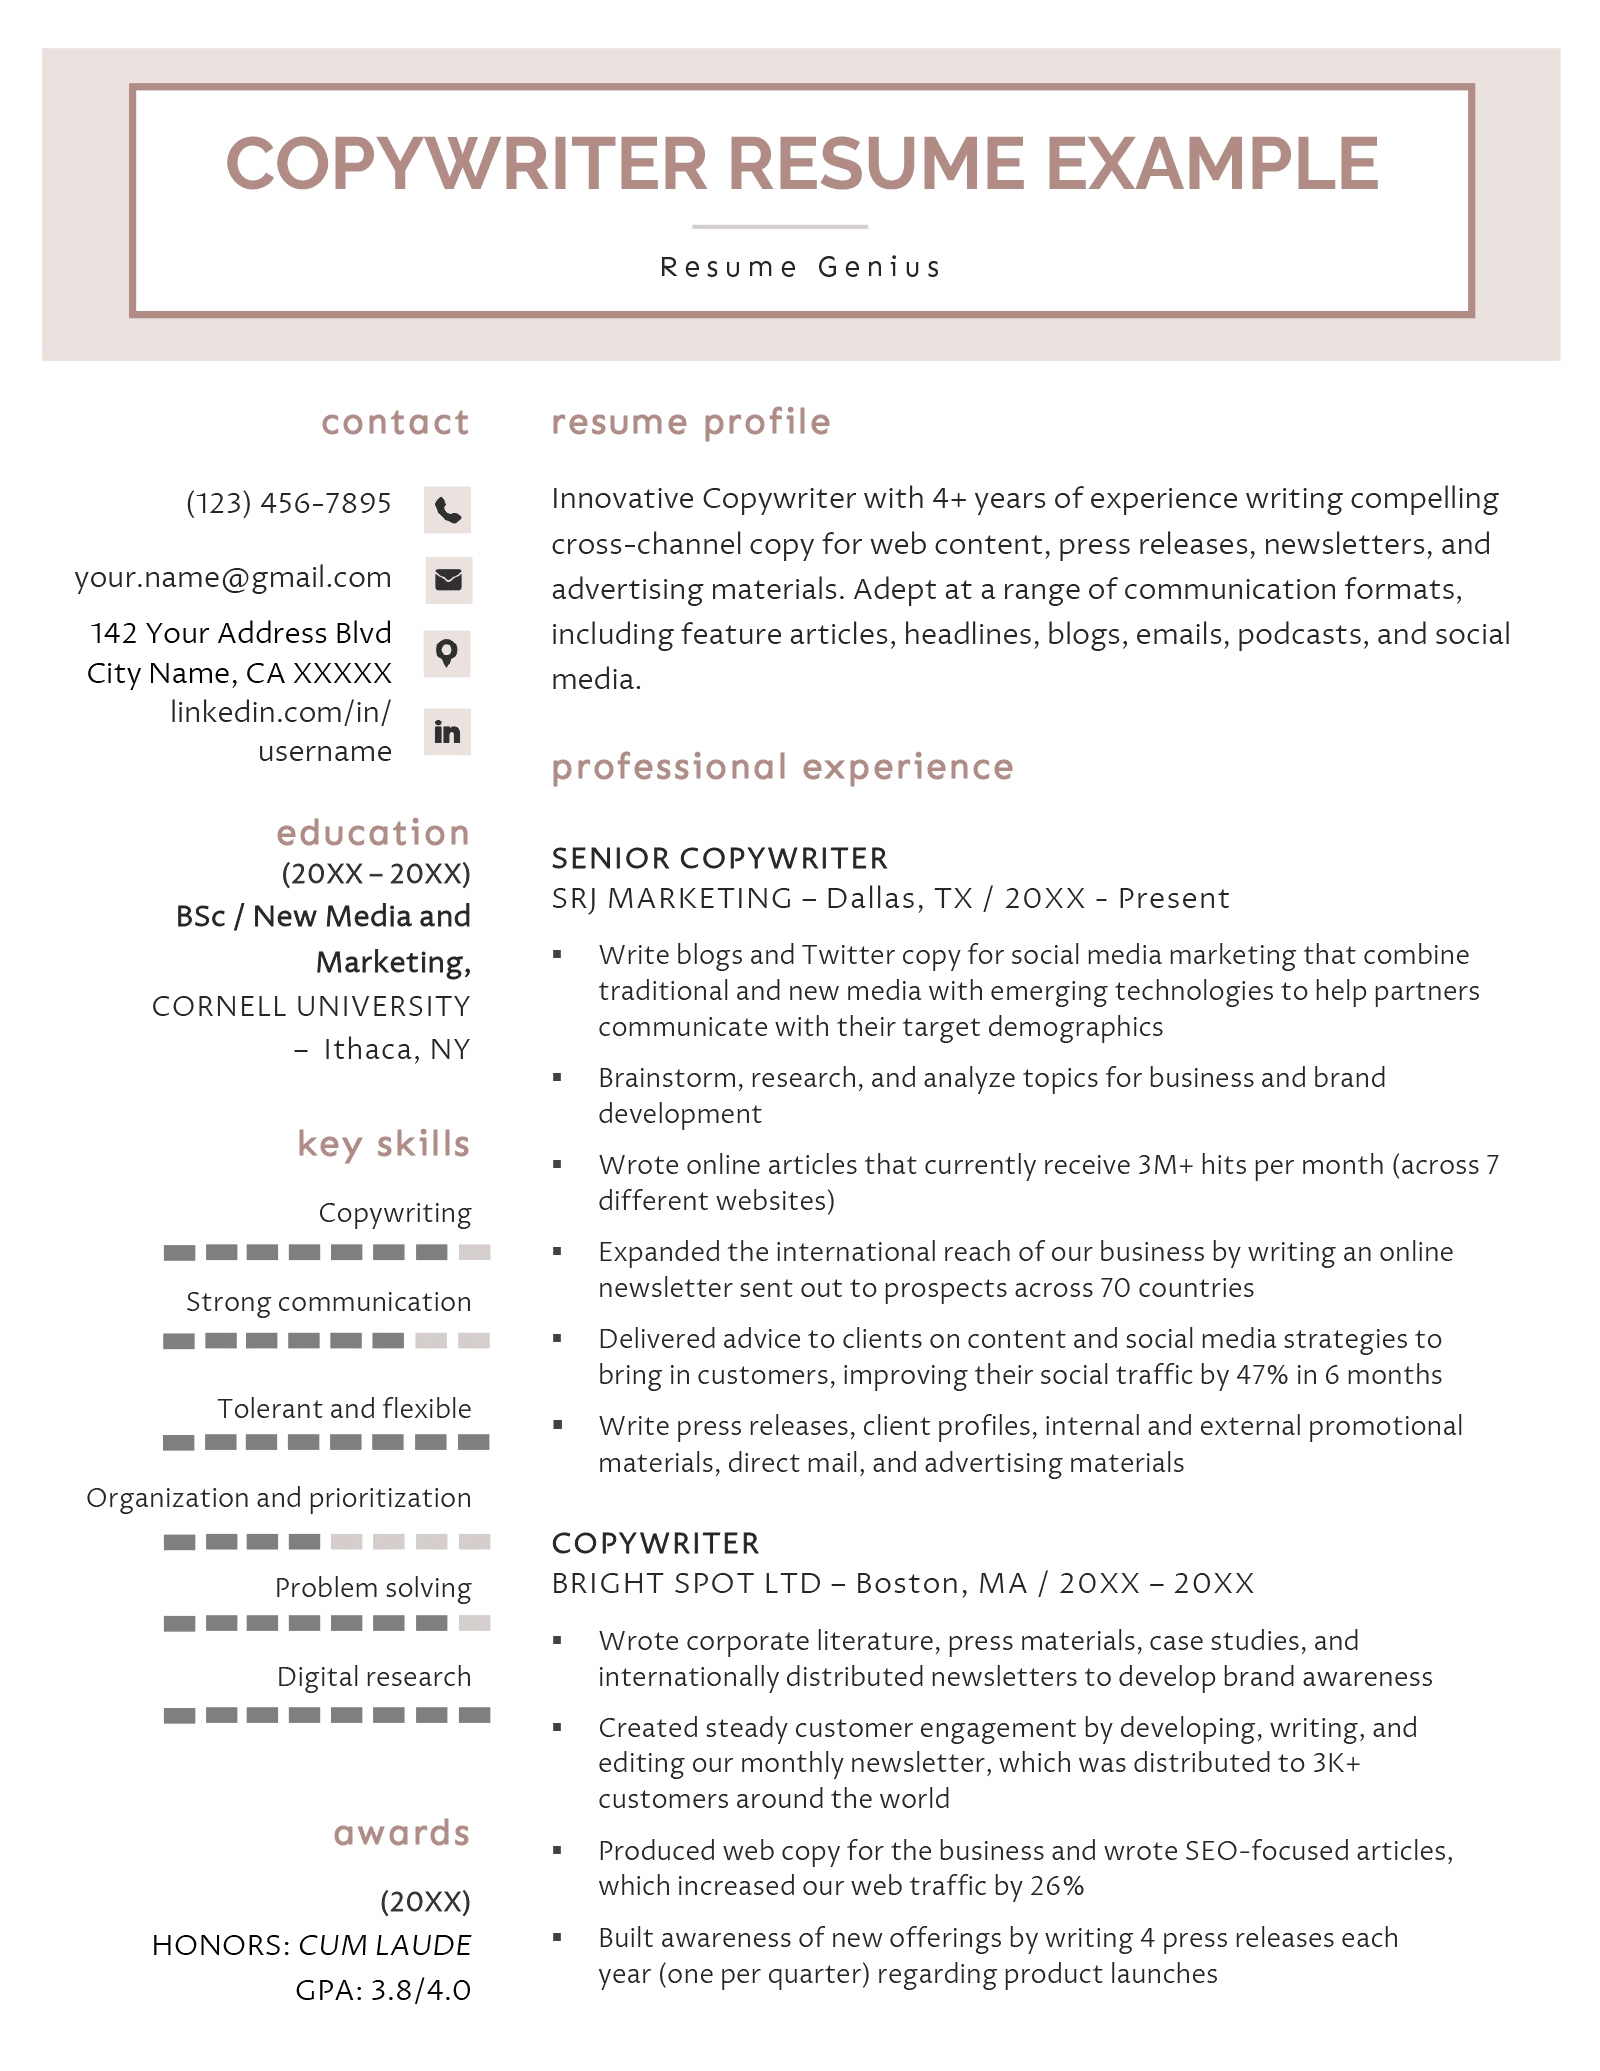 A copywriter resume sample with a pink header to make the applicant stand out